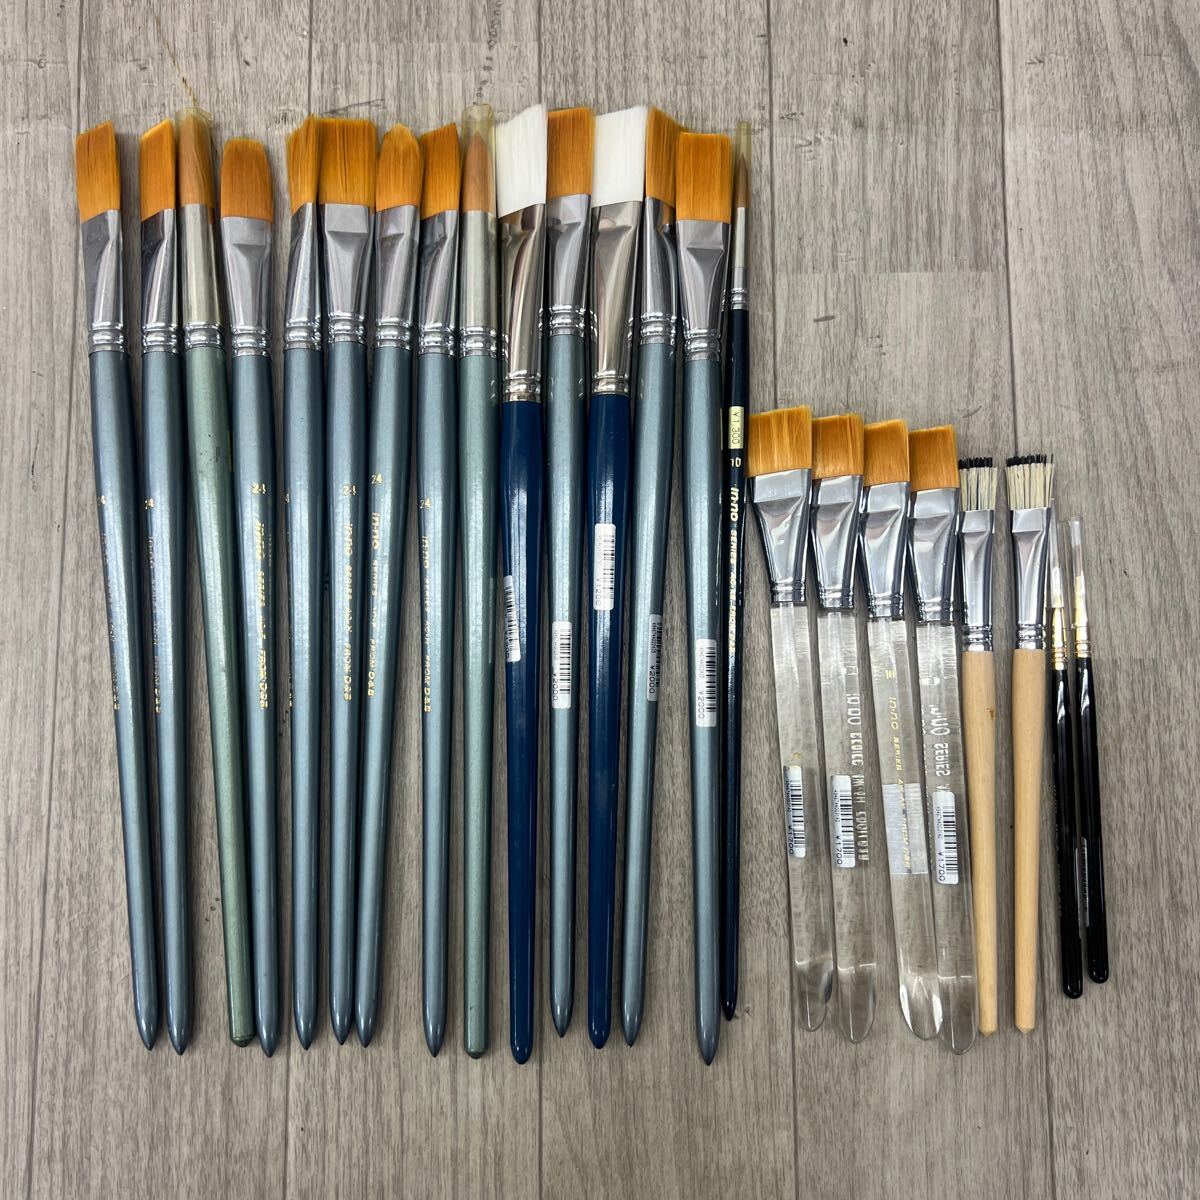 US240429 C-102 unused storage goods in-no series AC-H W BRUTUS AW-AH MW-A D&B writing brush paintbrush painting materials summarize 23 point set 